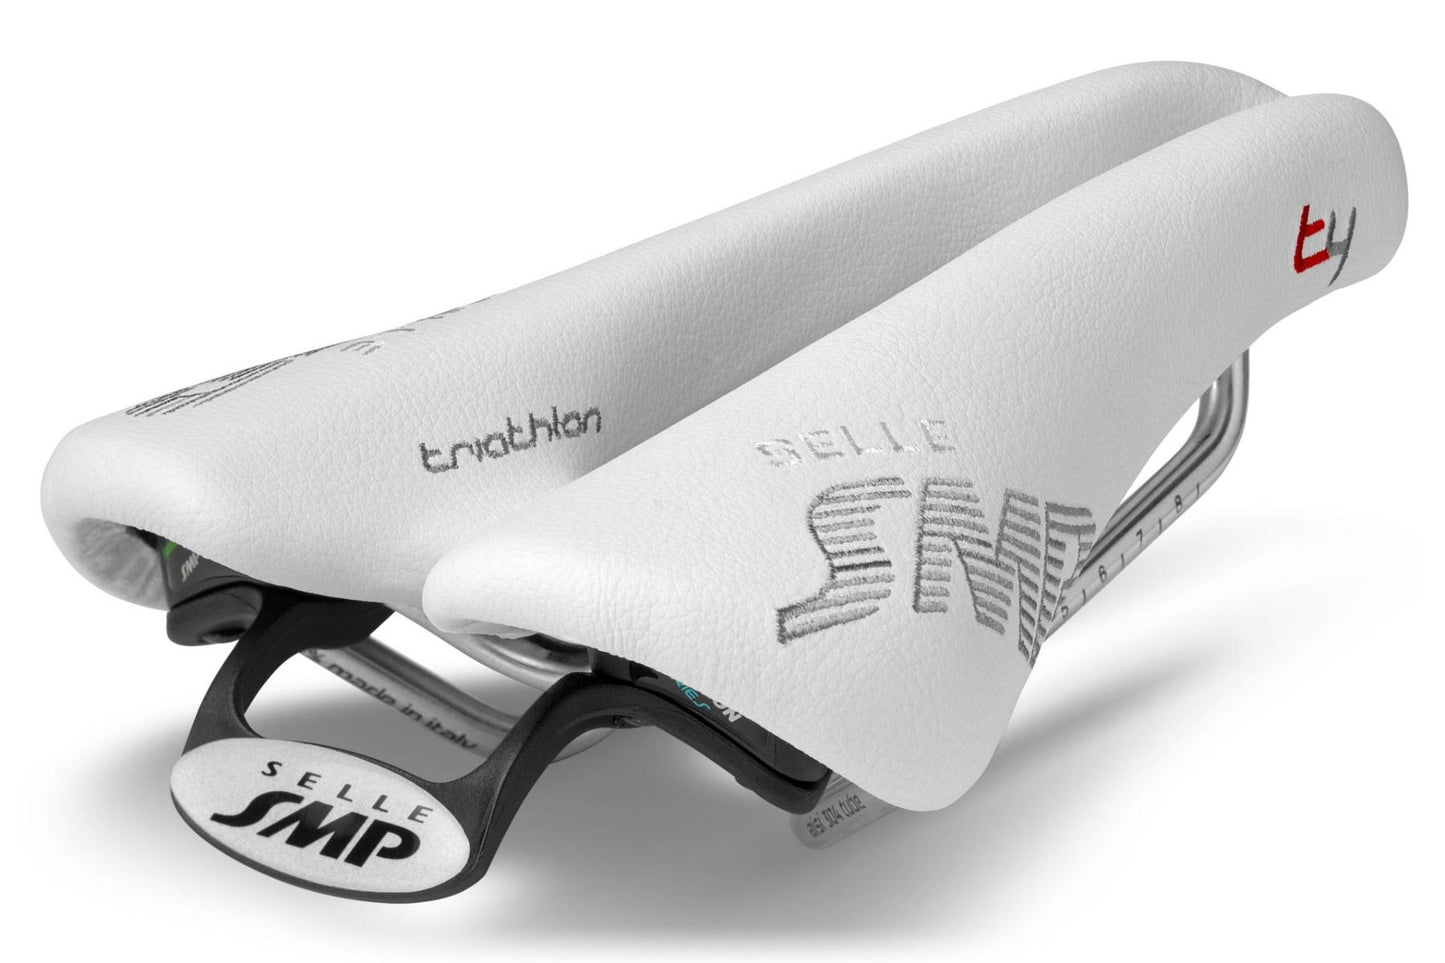 Selle SMP T4 Triathlon Saddle with Steel Rails (White)